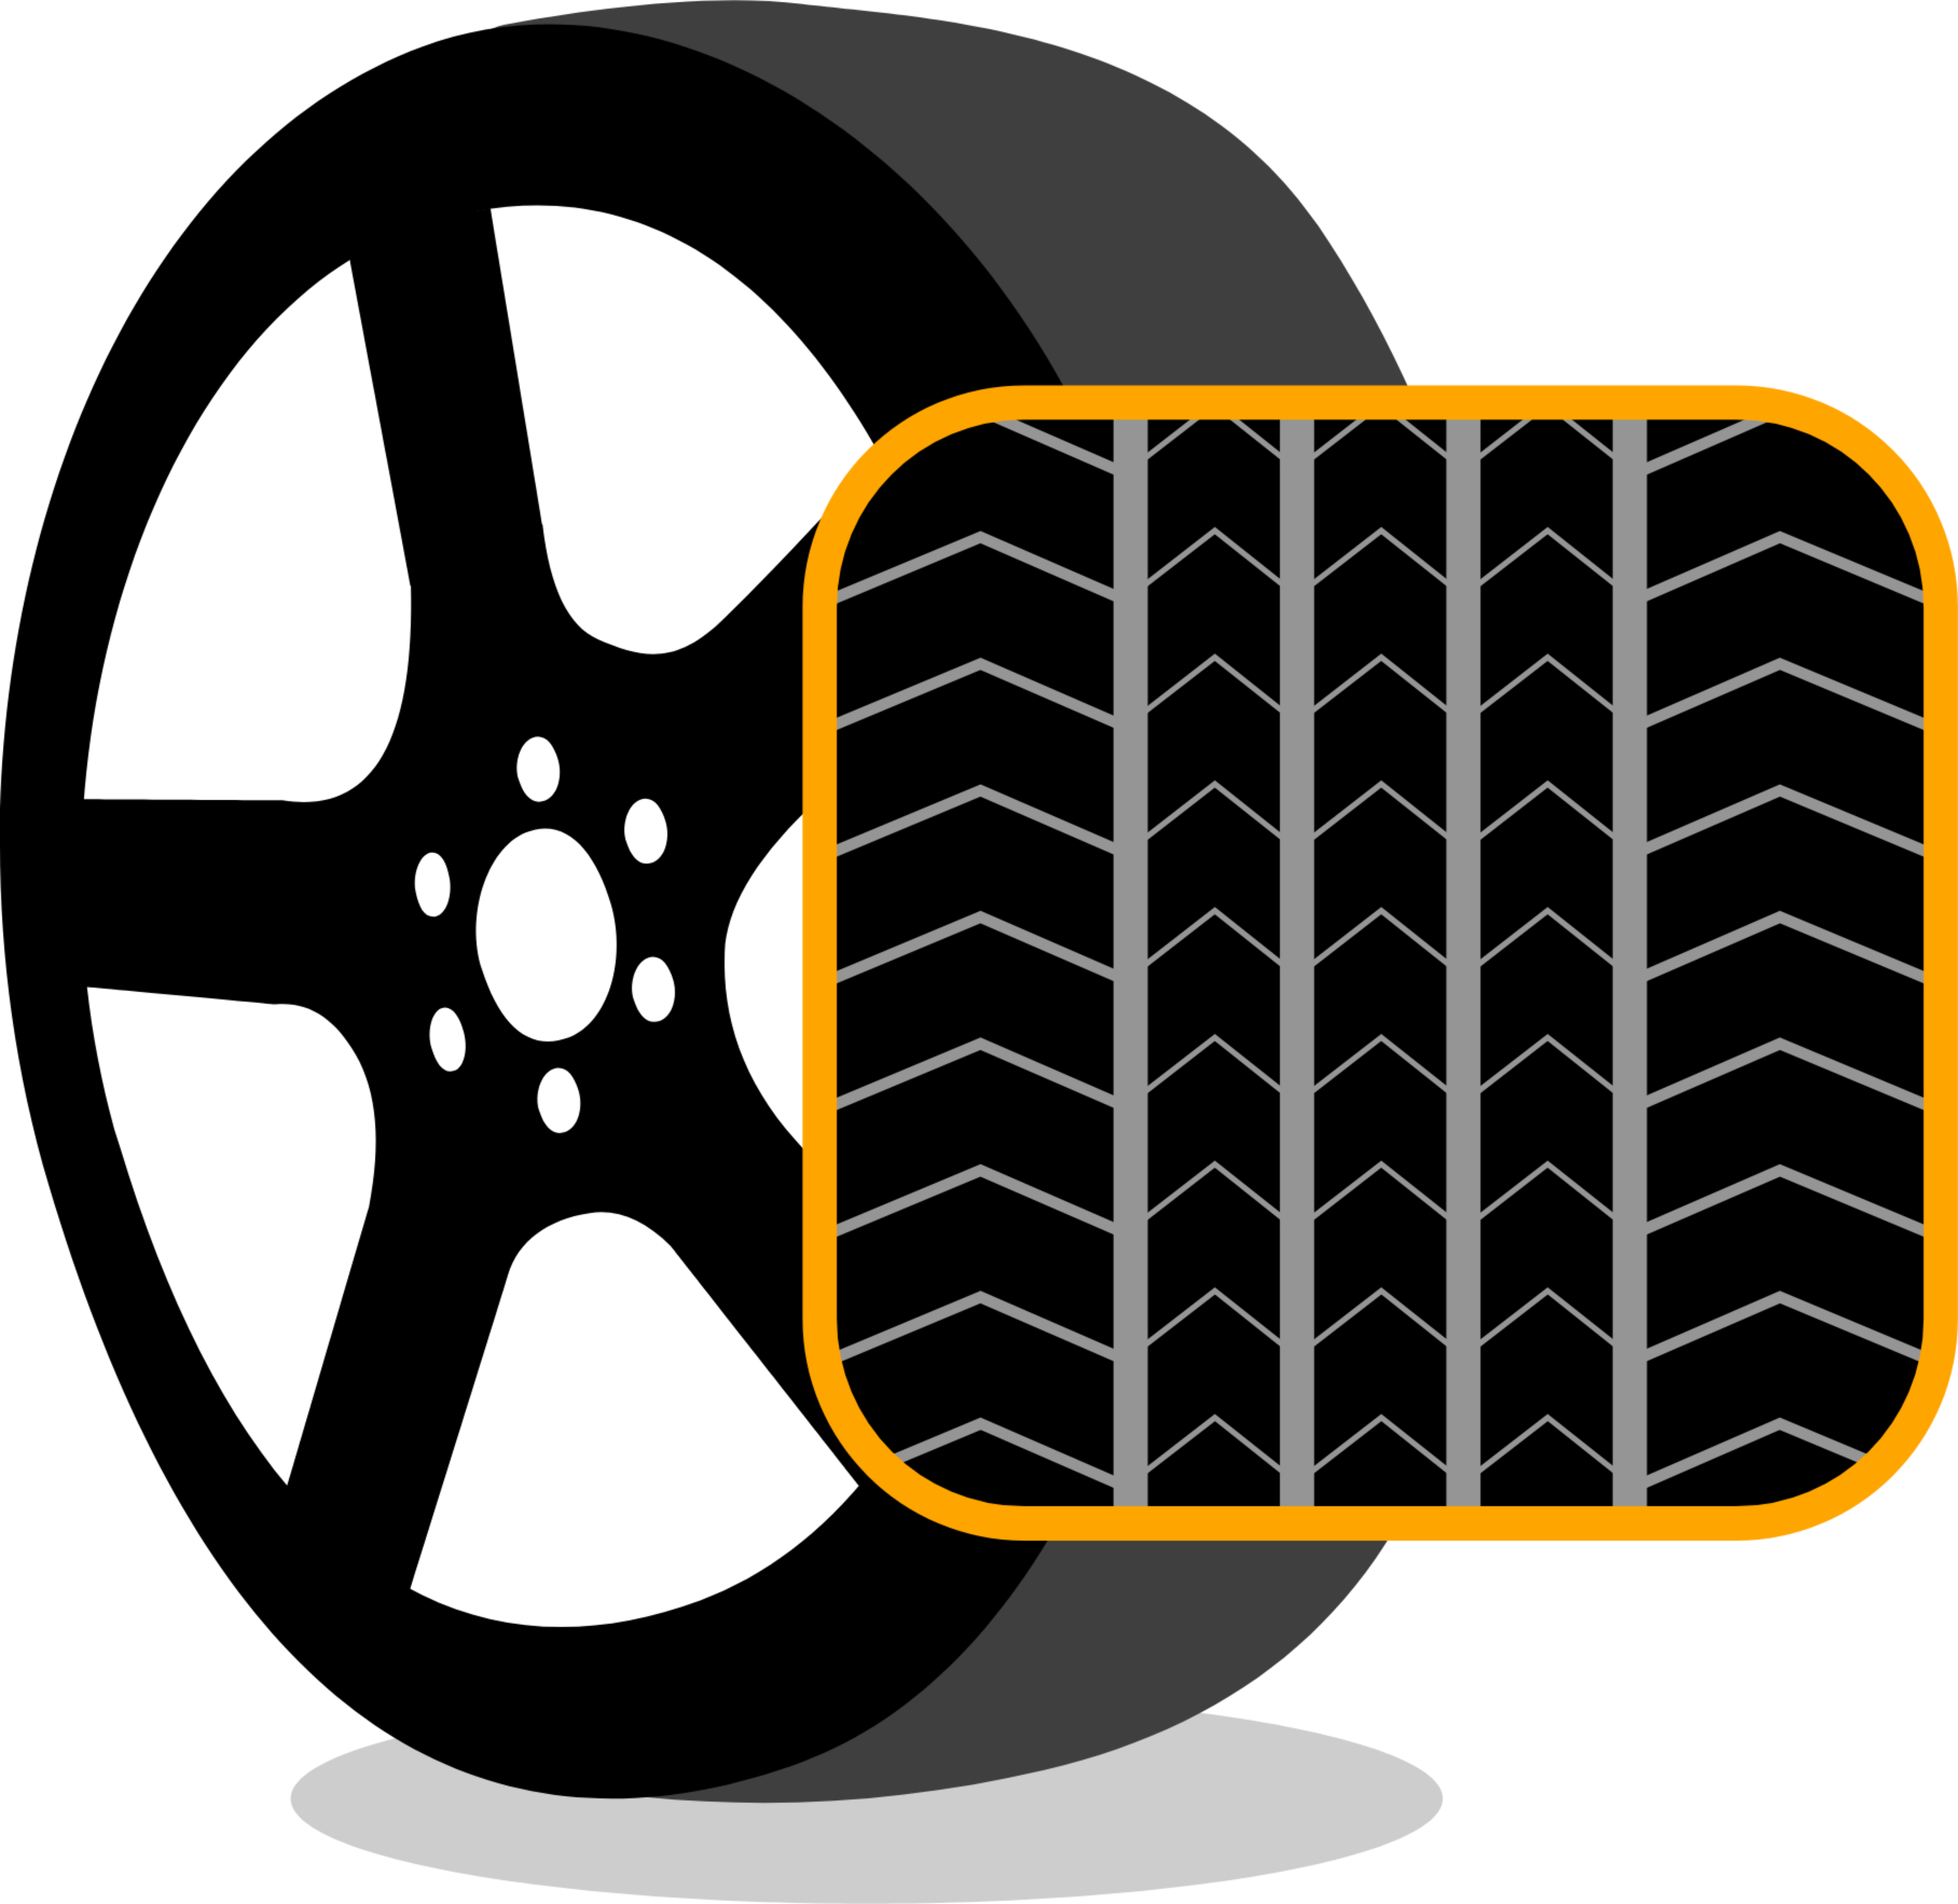 Graphic showing directional pattern of a car tire.